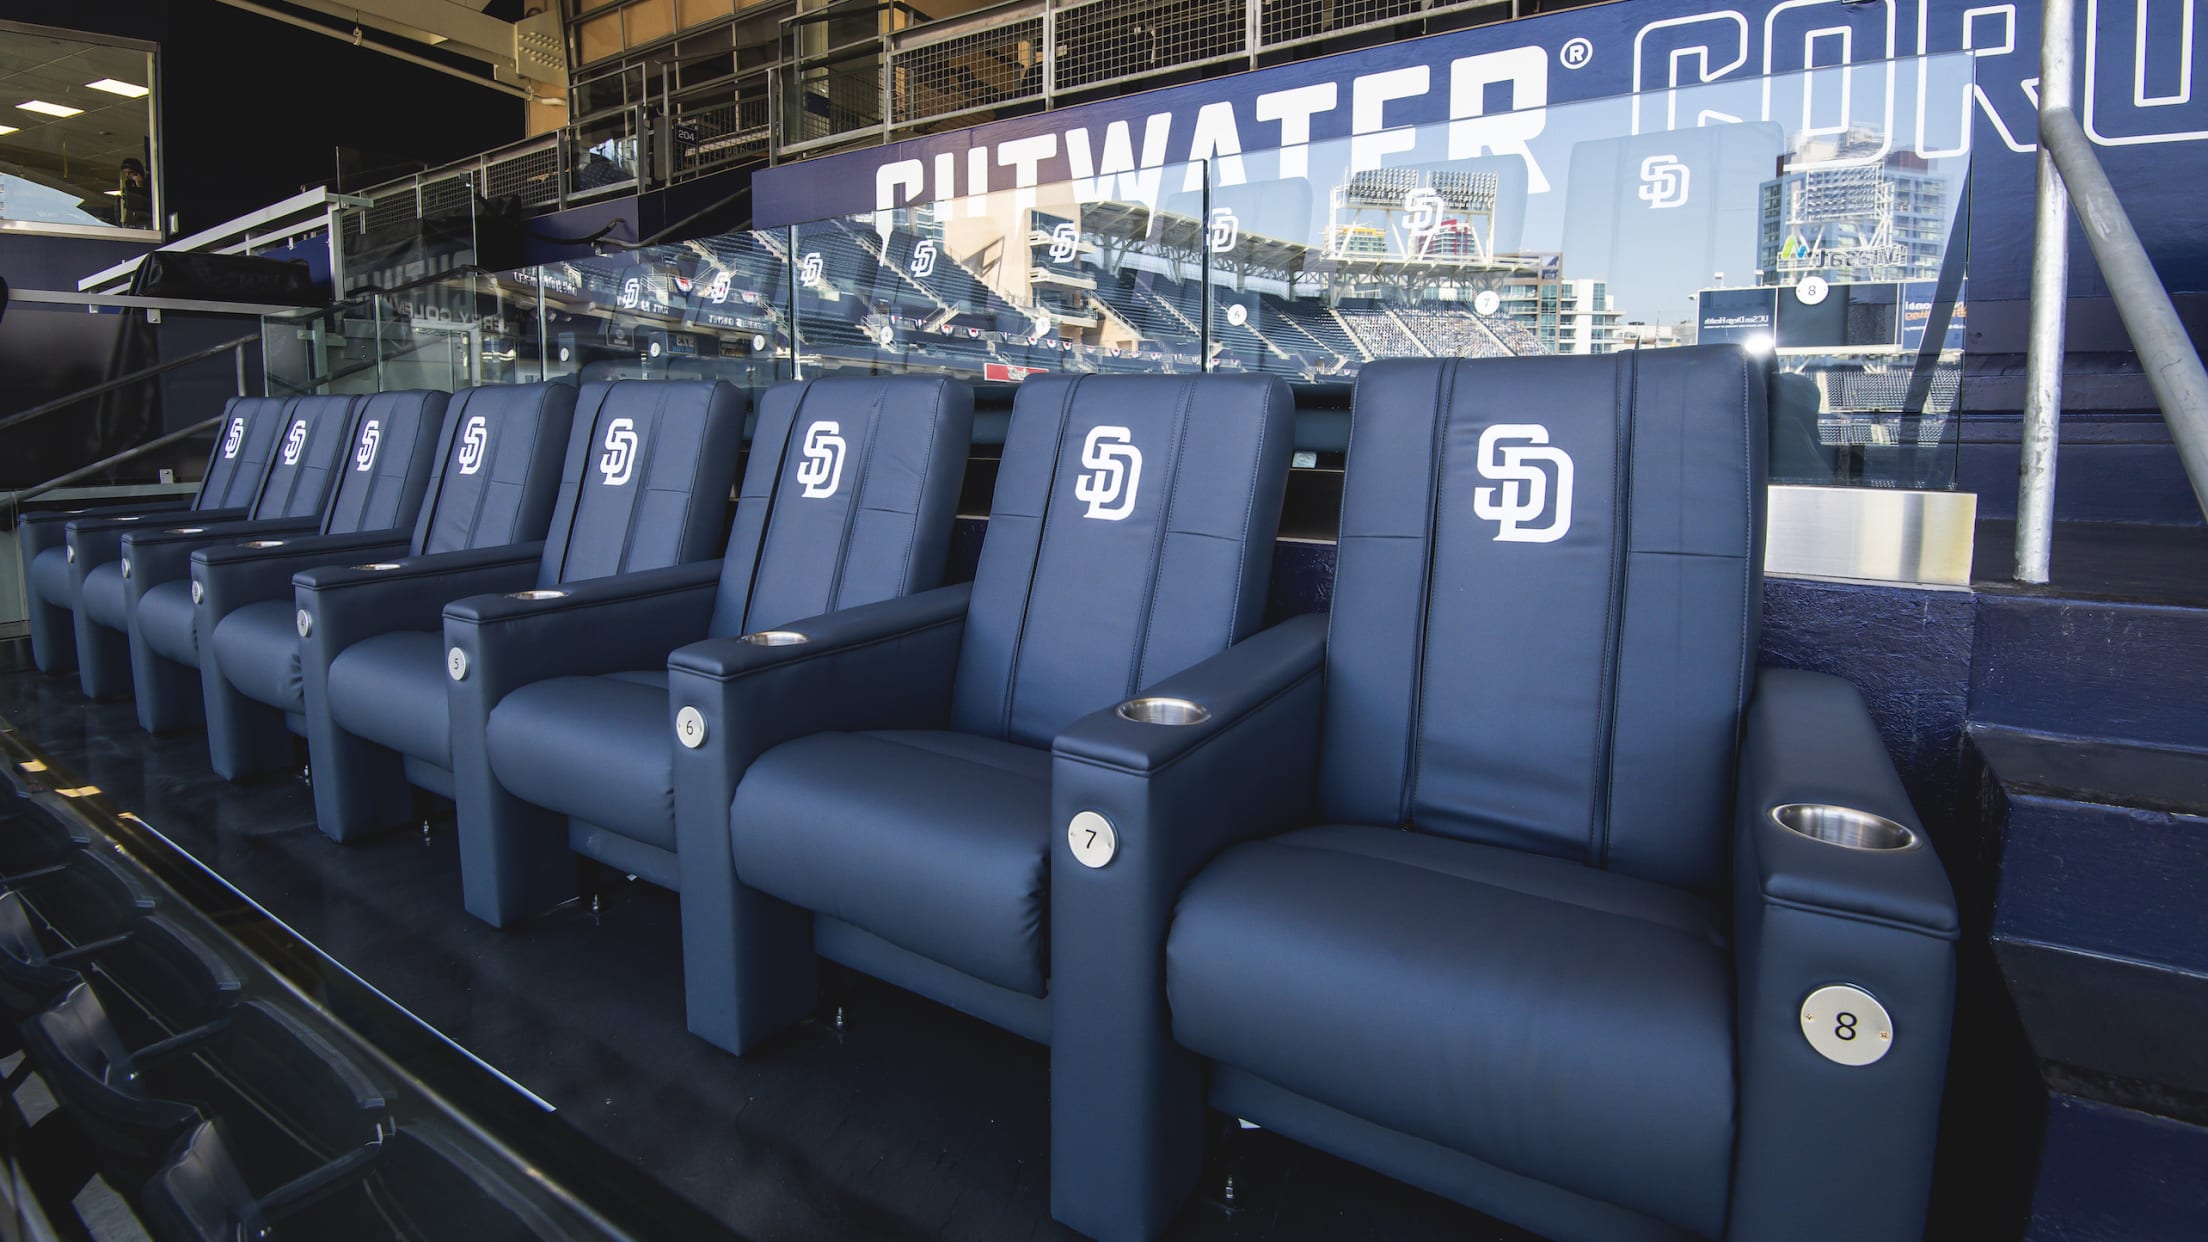 Padres Lexus Seats Awesome Home